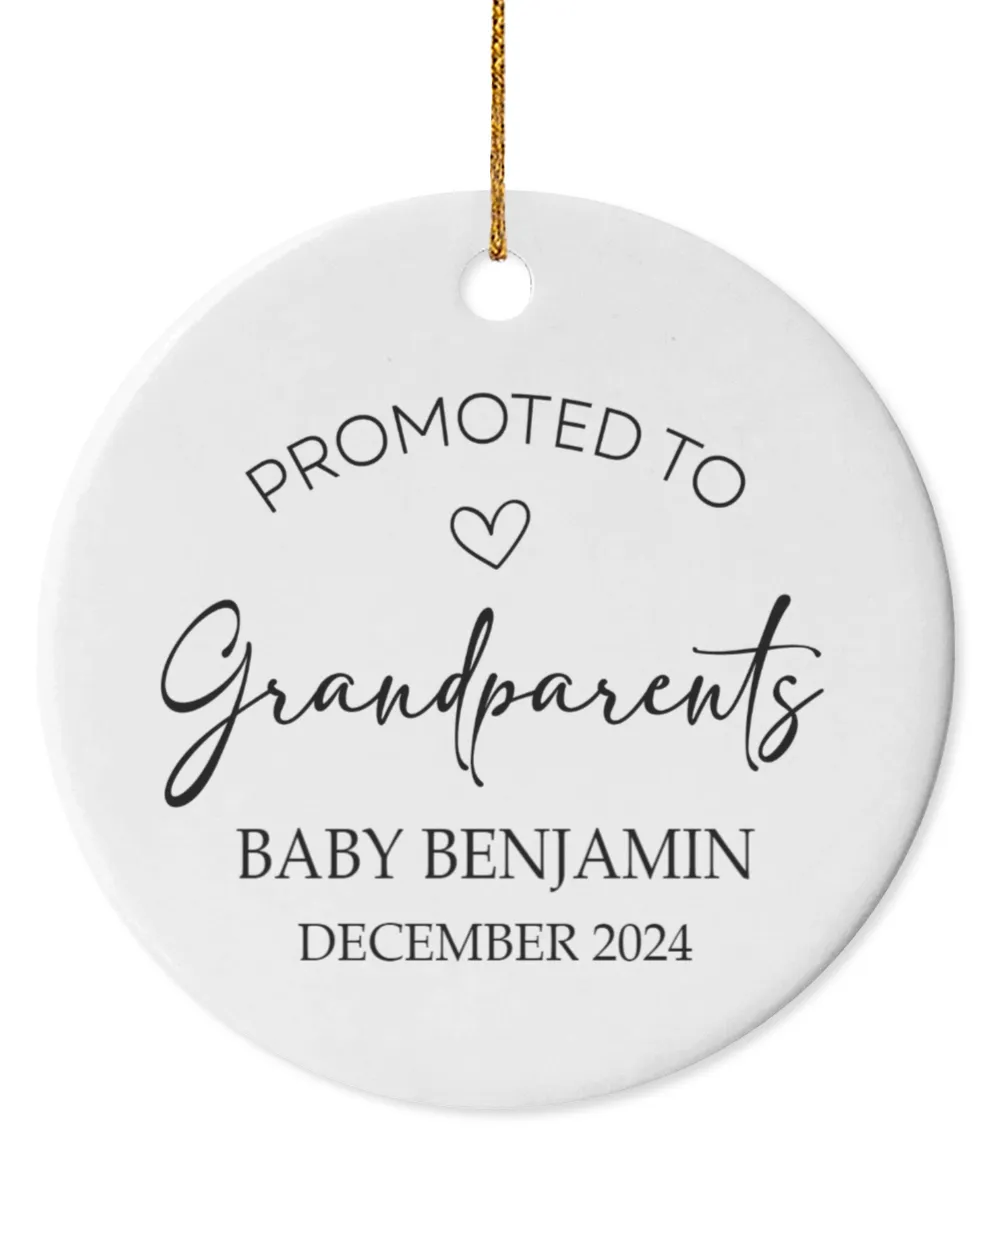 Personalized "Promoted to Grandparents" Pregnancy Announcement with Baby Name and Due Date